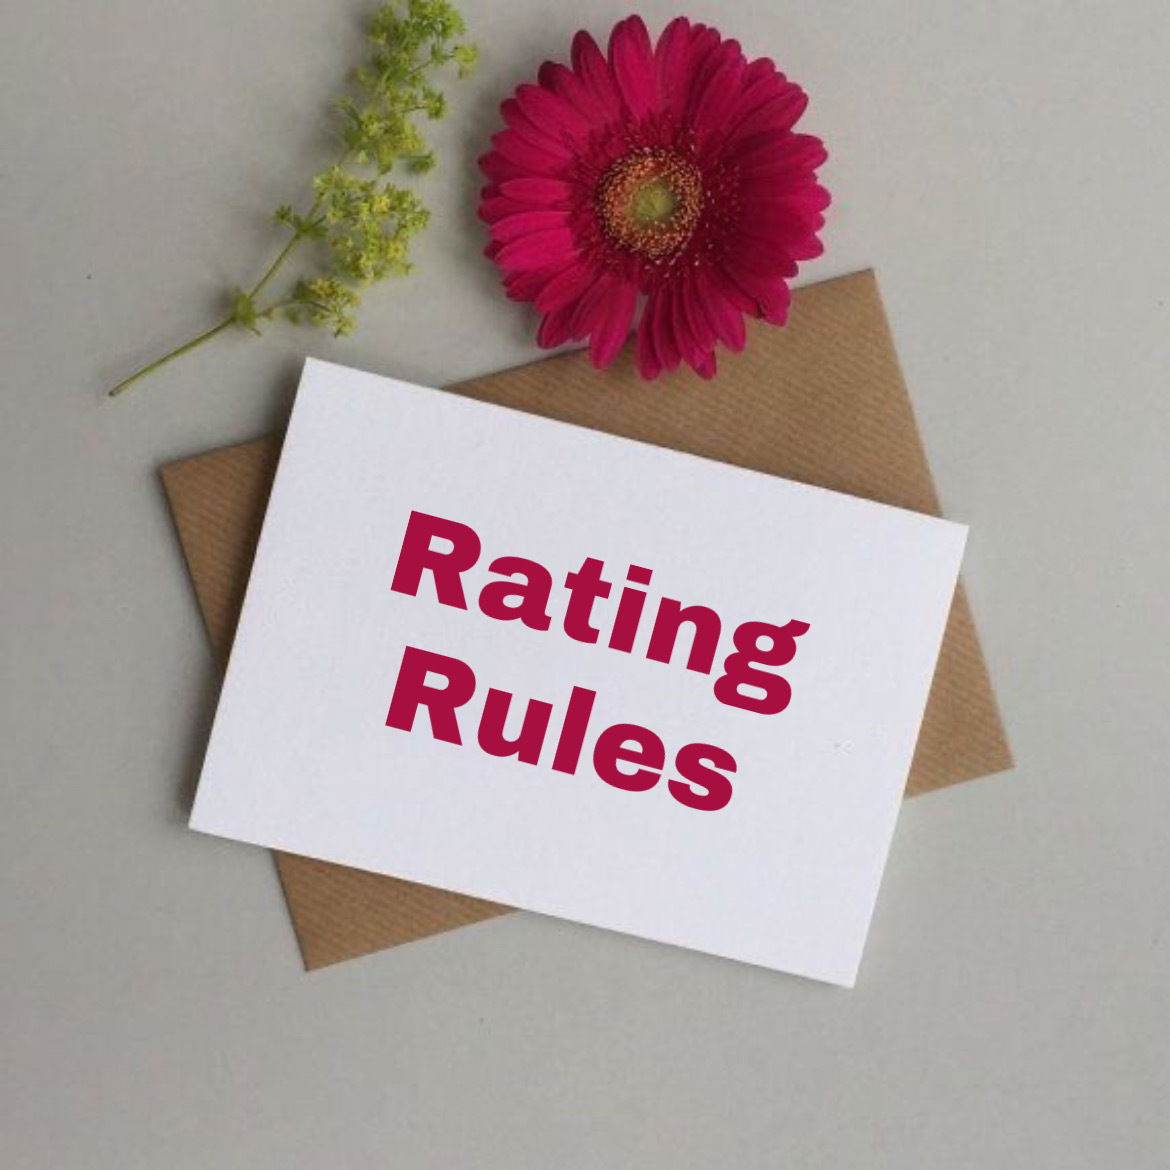 RATING RULES